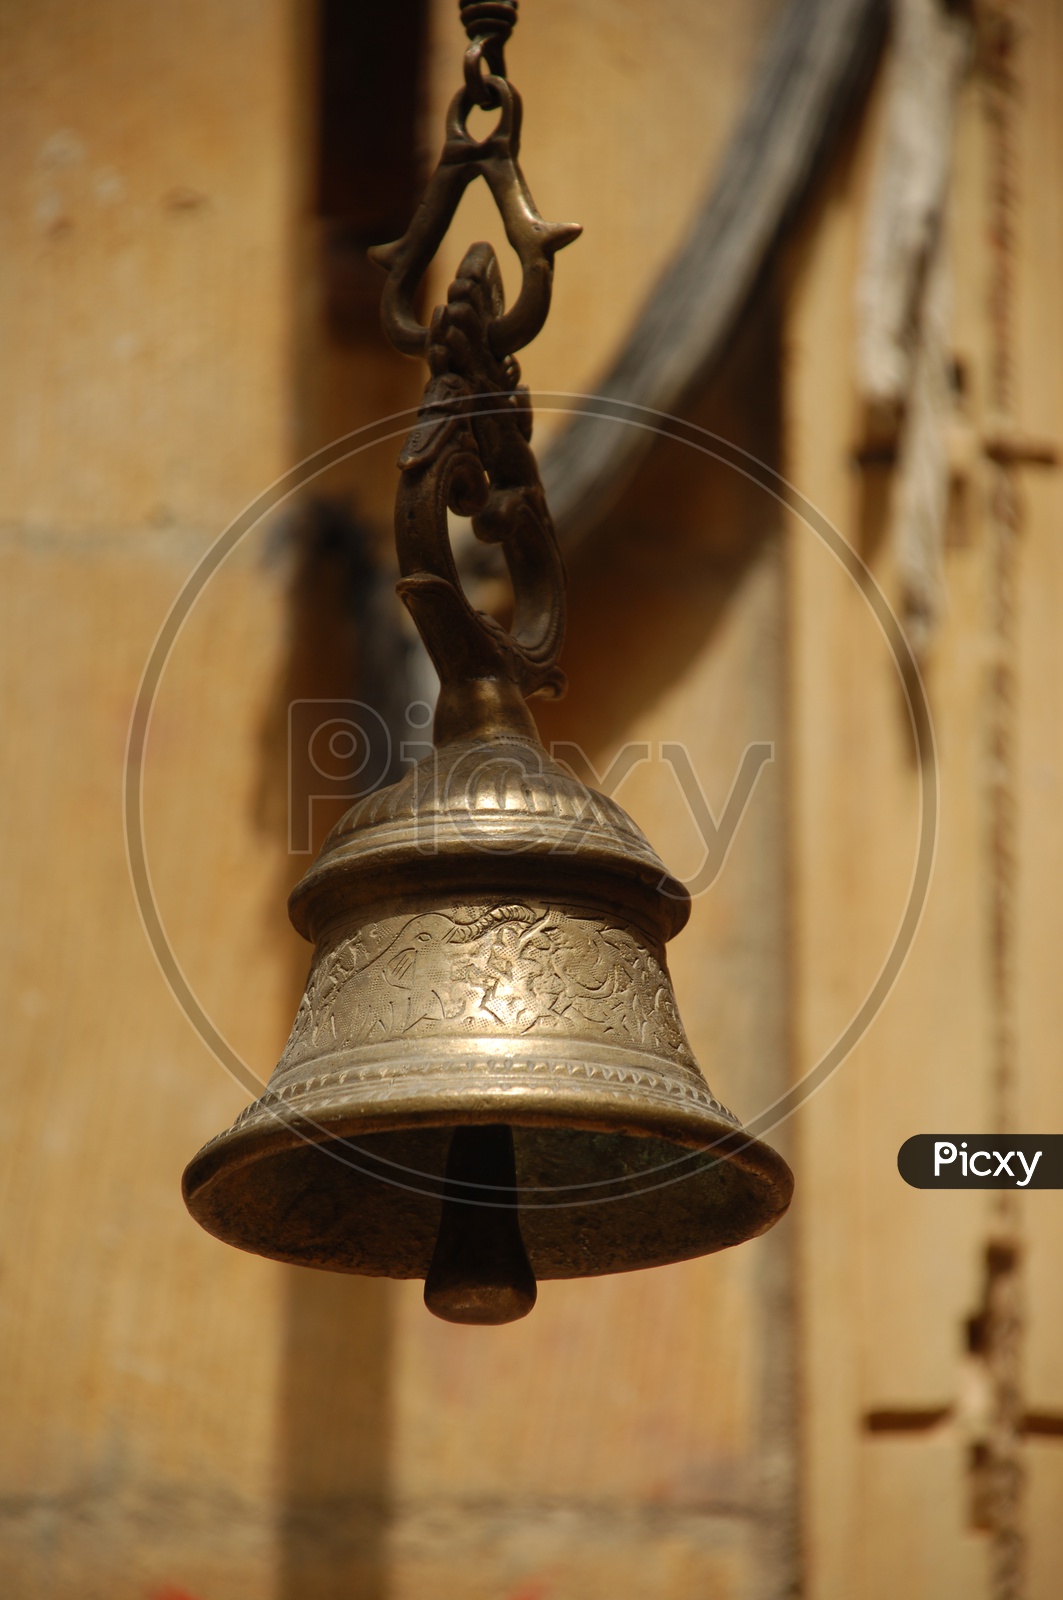 A traditional bell carved with design